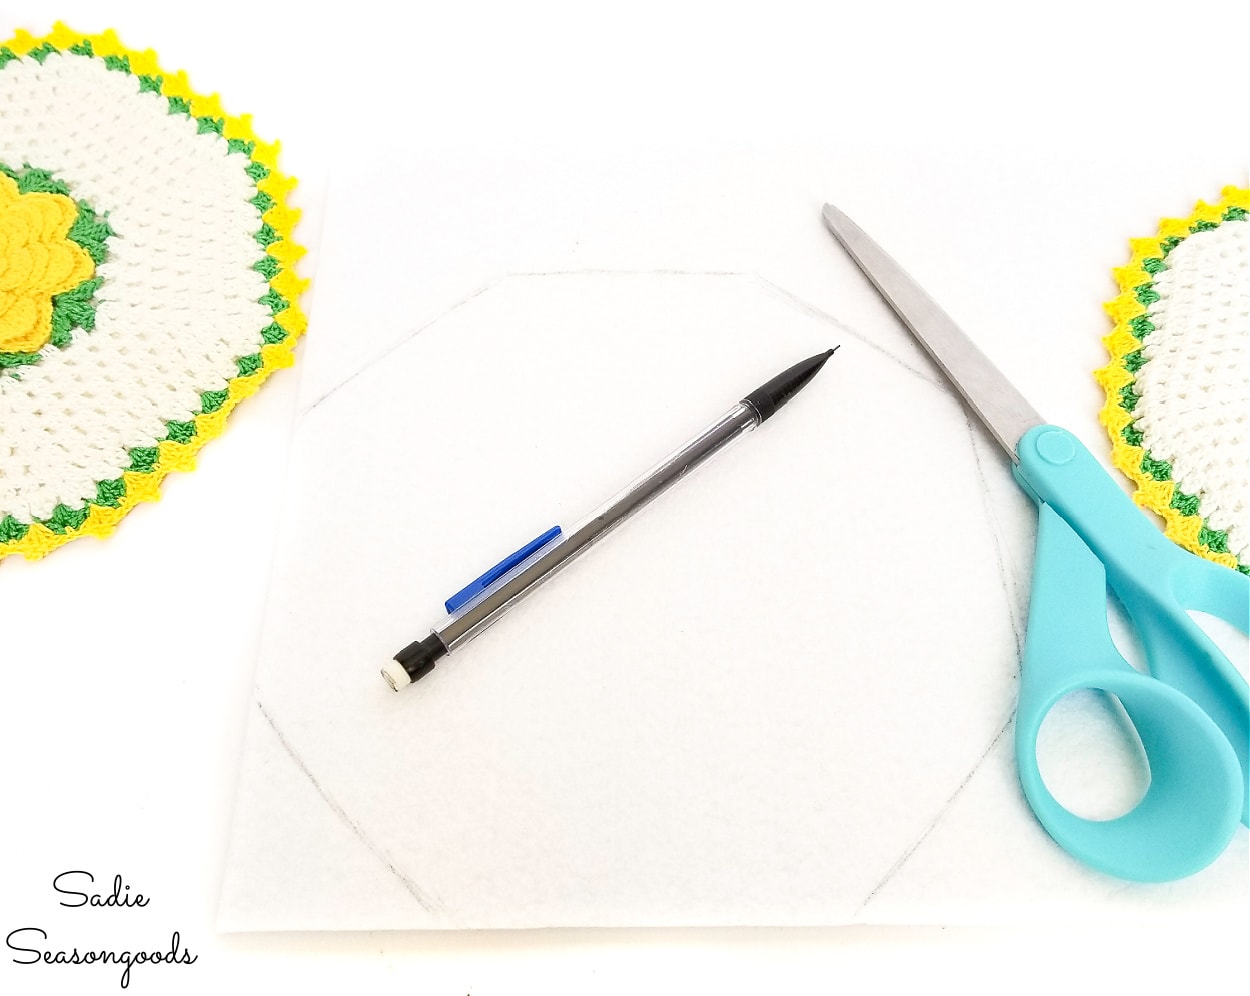 Tracing the crocheted potholders on firm interfacing